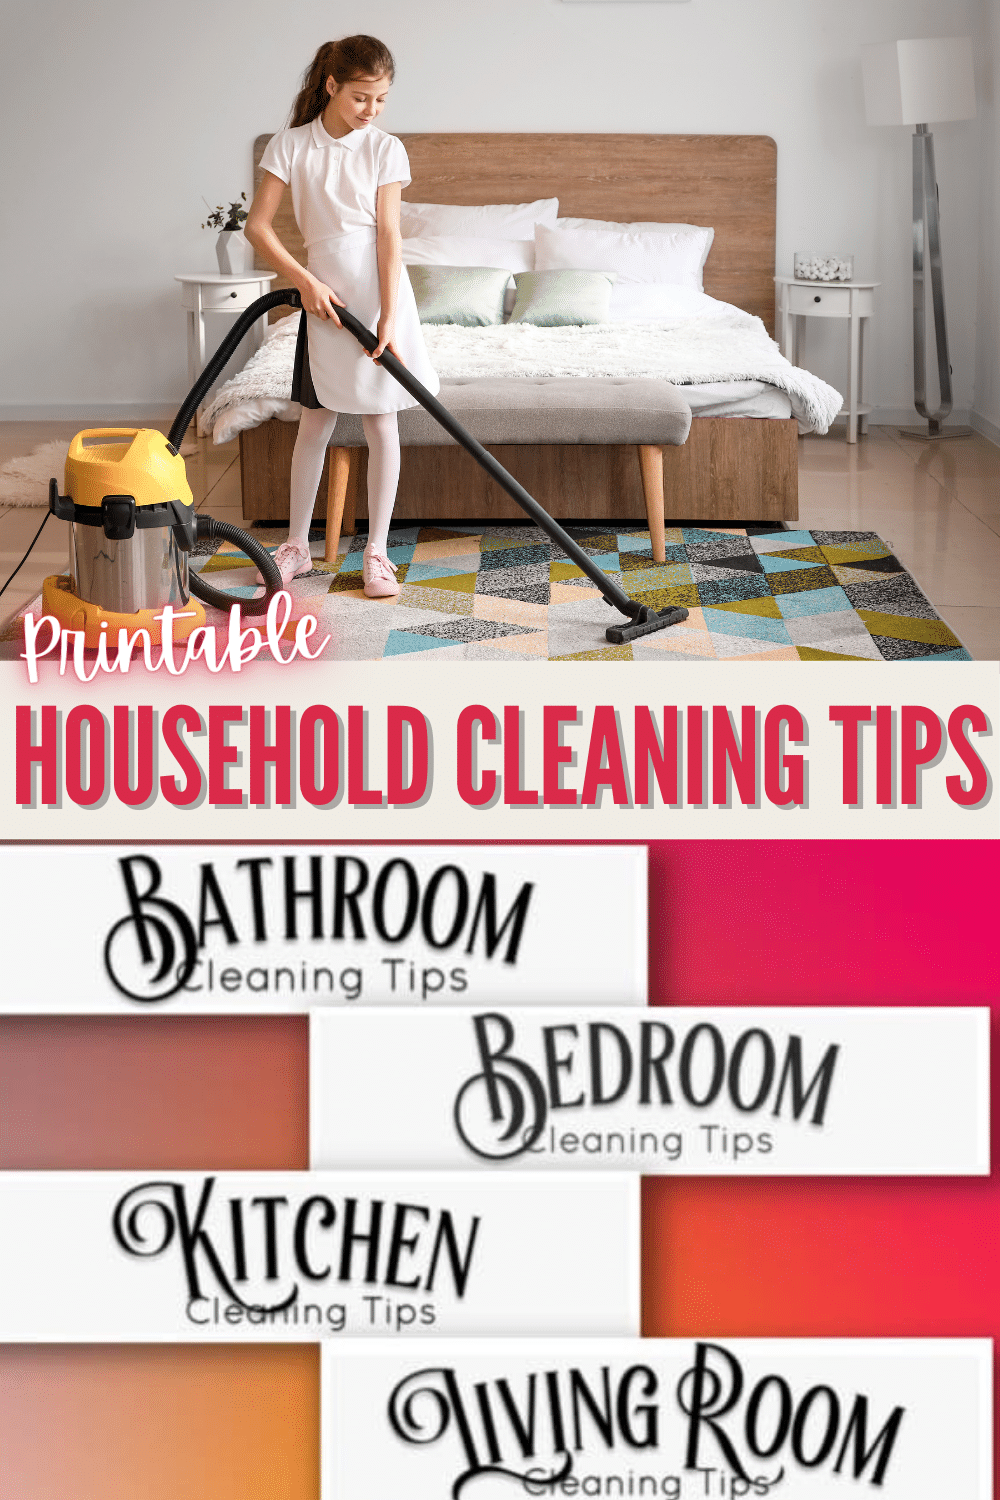 These printable household cleaning tips cover the bathroom, kitchen, bedroom and living room. Cleaning hacks to make the housework quick and easy each week. #printables #cleaningtips #housework via @wondermomwannab